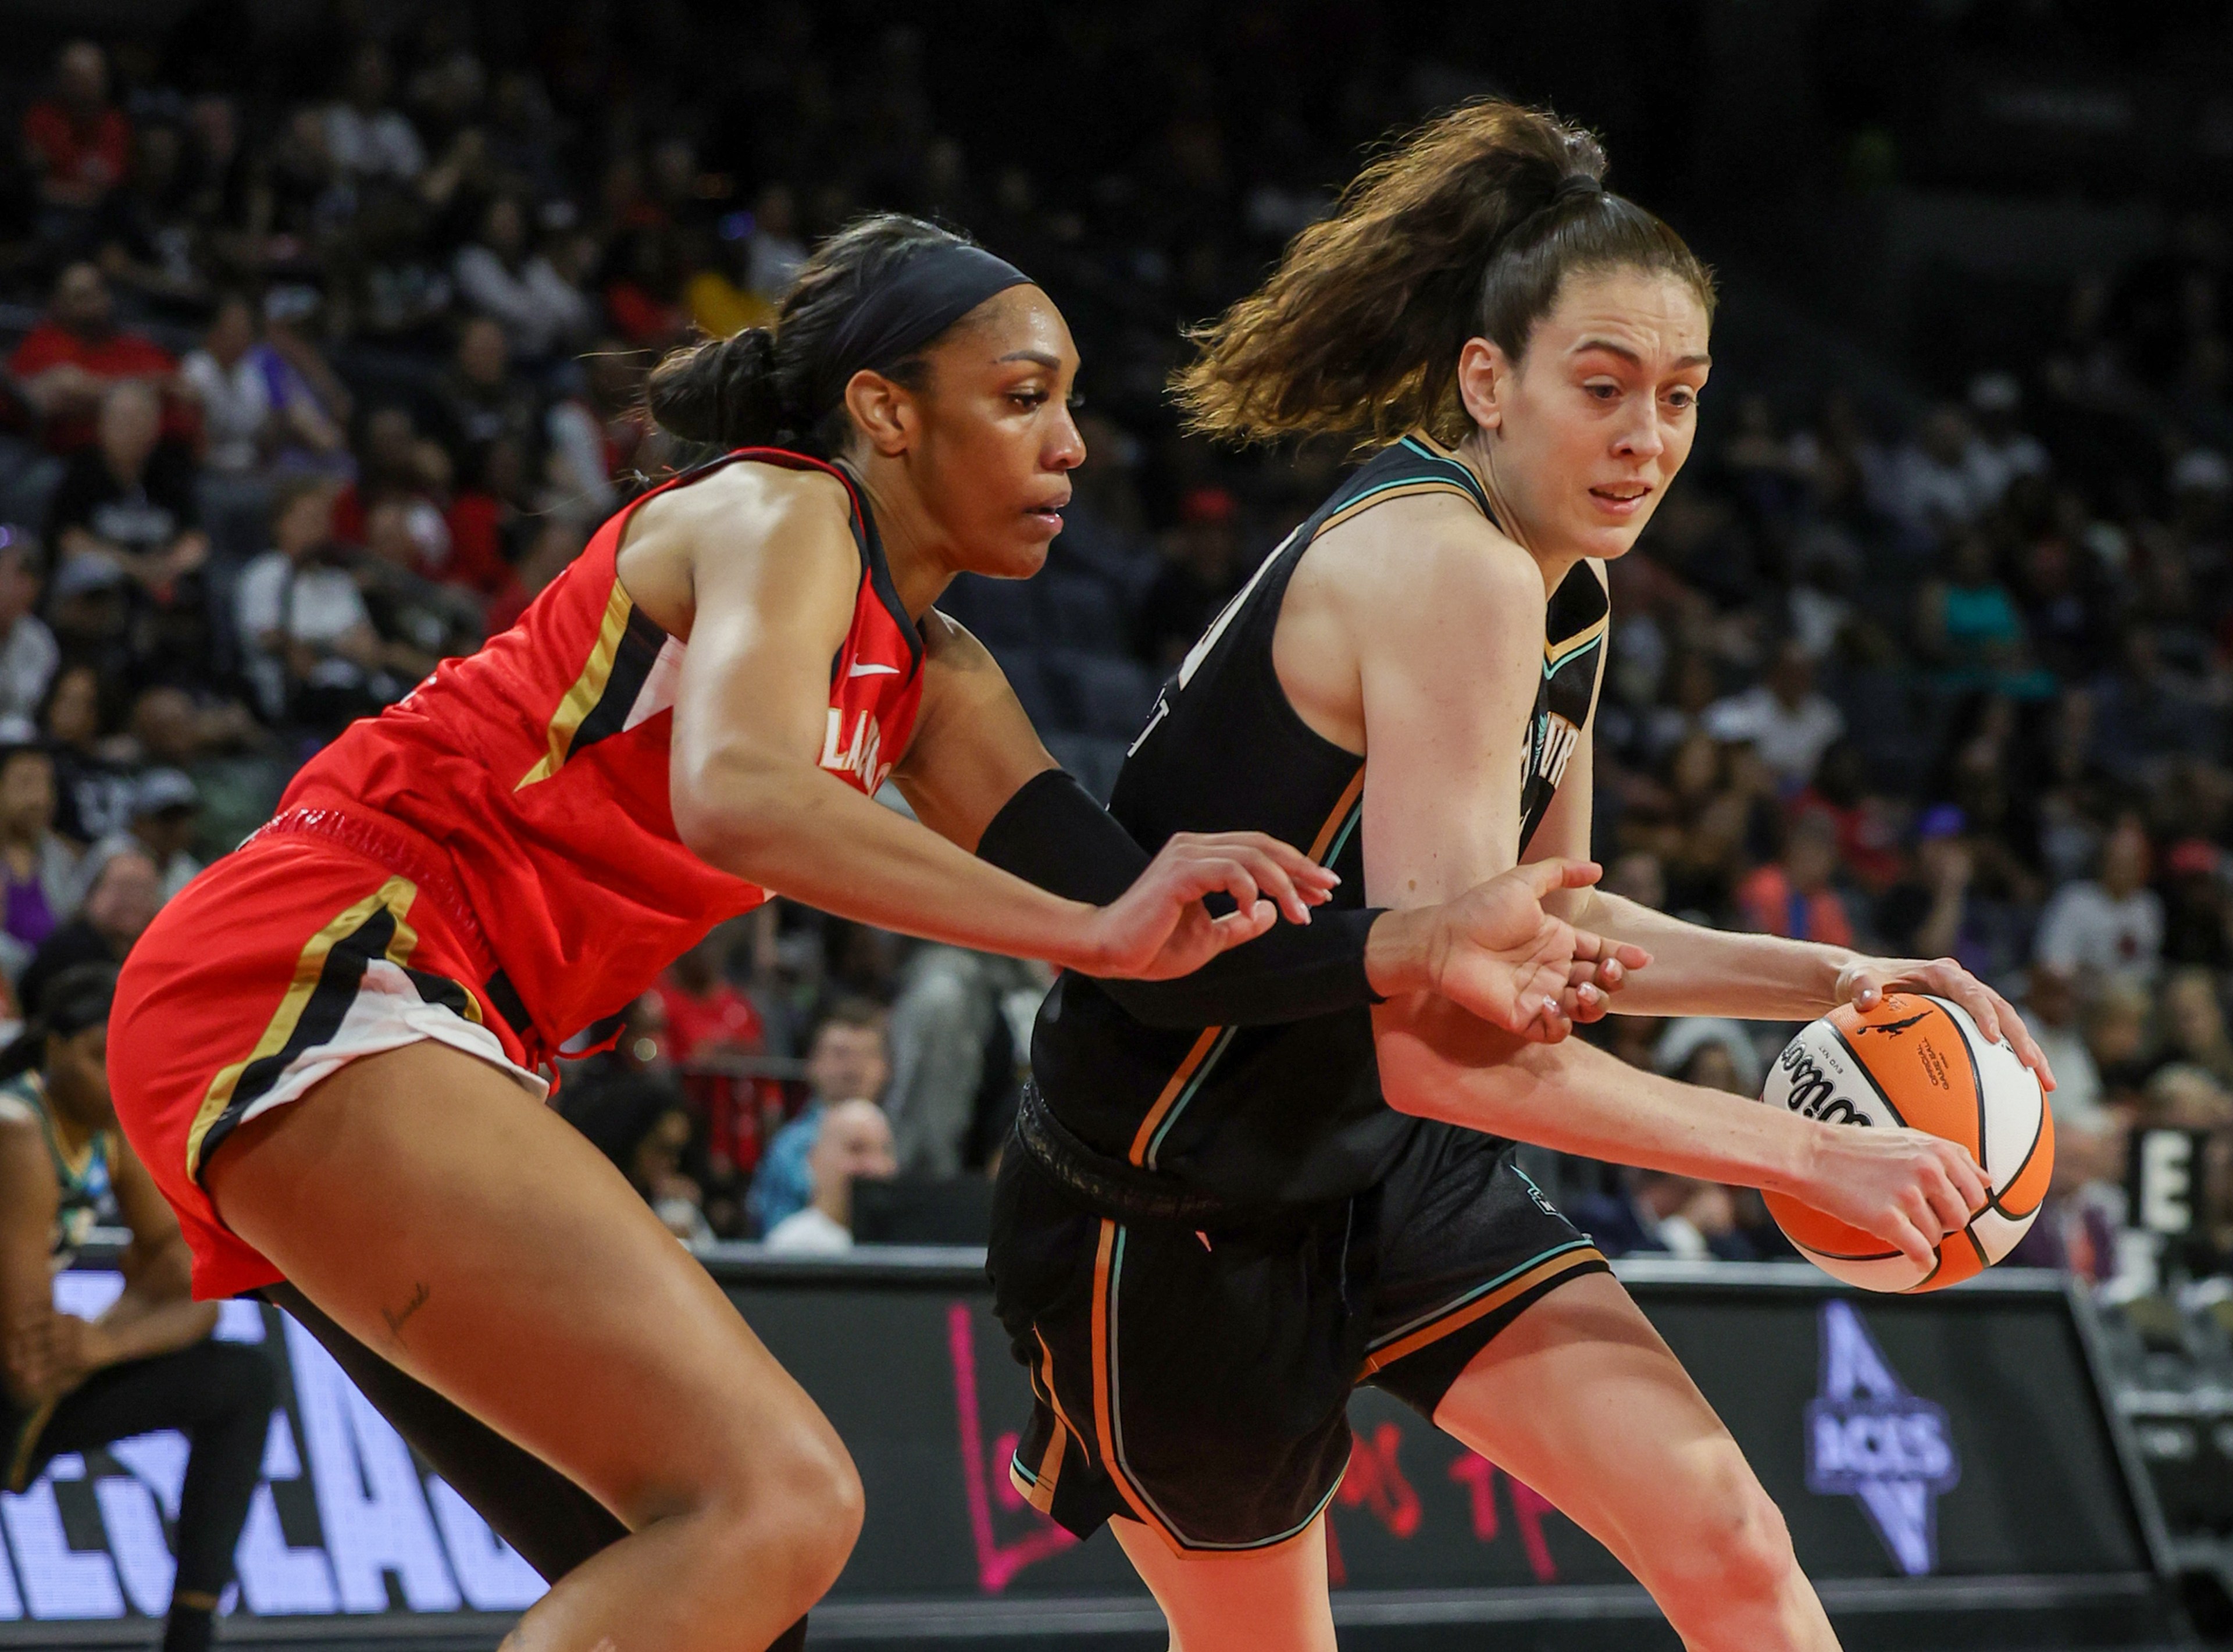 LAS VEGAS, NEVADA - MAY 13: Breanna Stewart #30 of the New York Liberty drives against A'ja Wilson #22 of the Las Vegas Aces in the second quarter of their preseason game at Michelob ULTRA Arena on May 13, 2023 in Las Vegas, Nevada. The Aces defeated the Liberty 84-77.